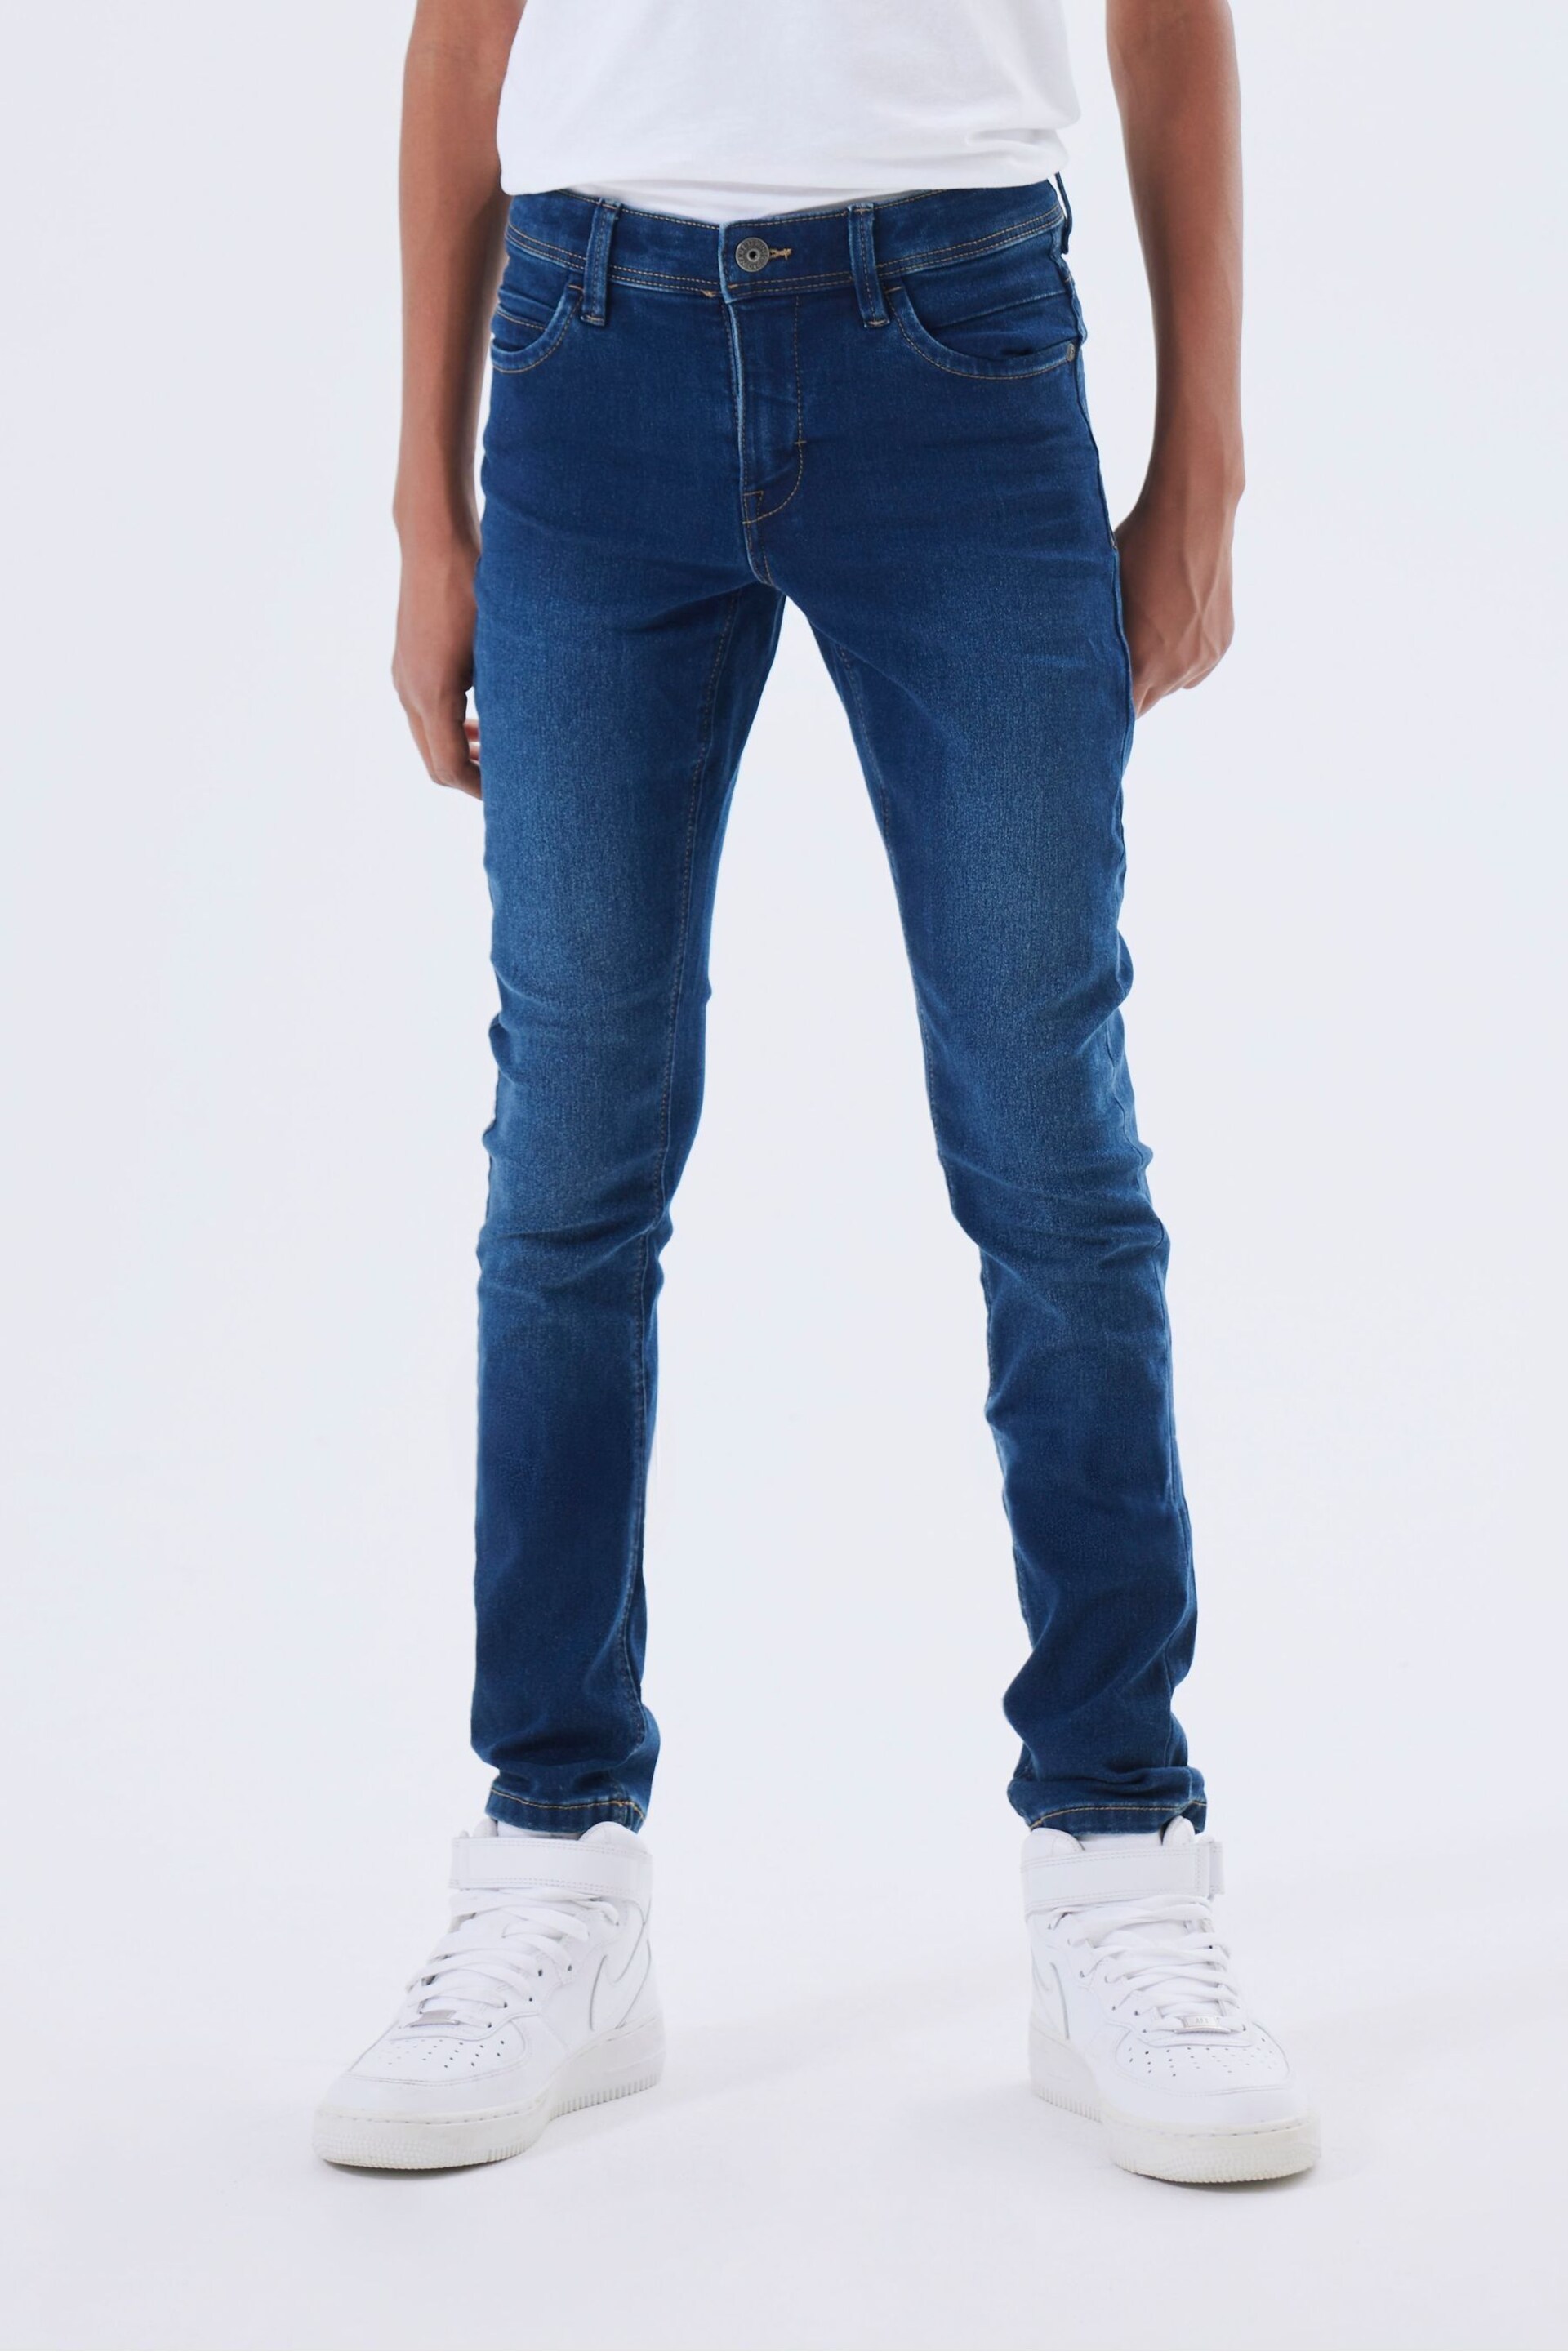 Name It Blue Skinny Jeans - Image 1 of 6